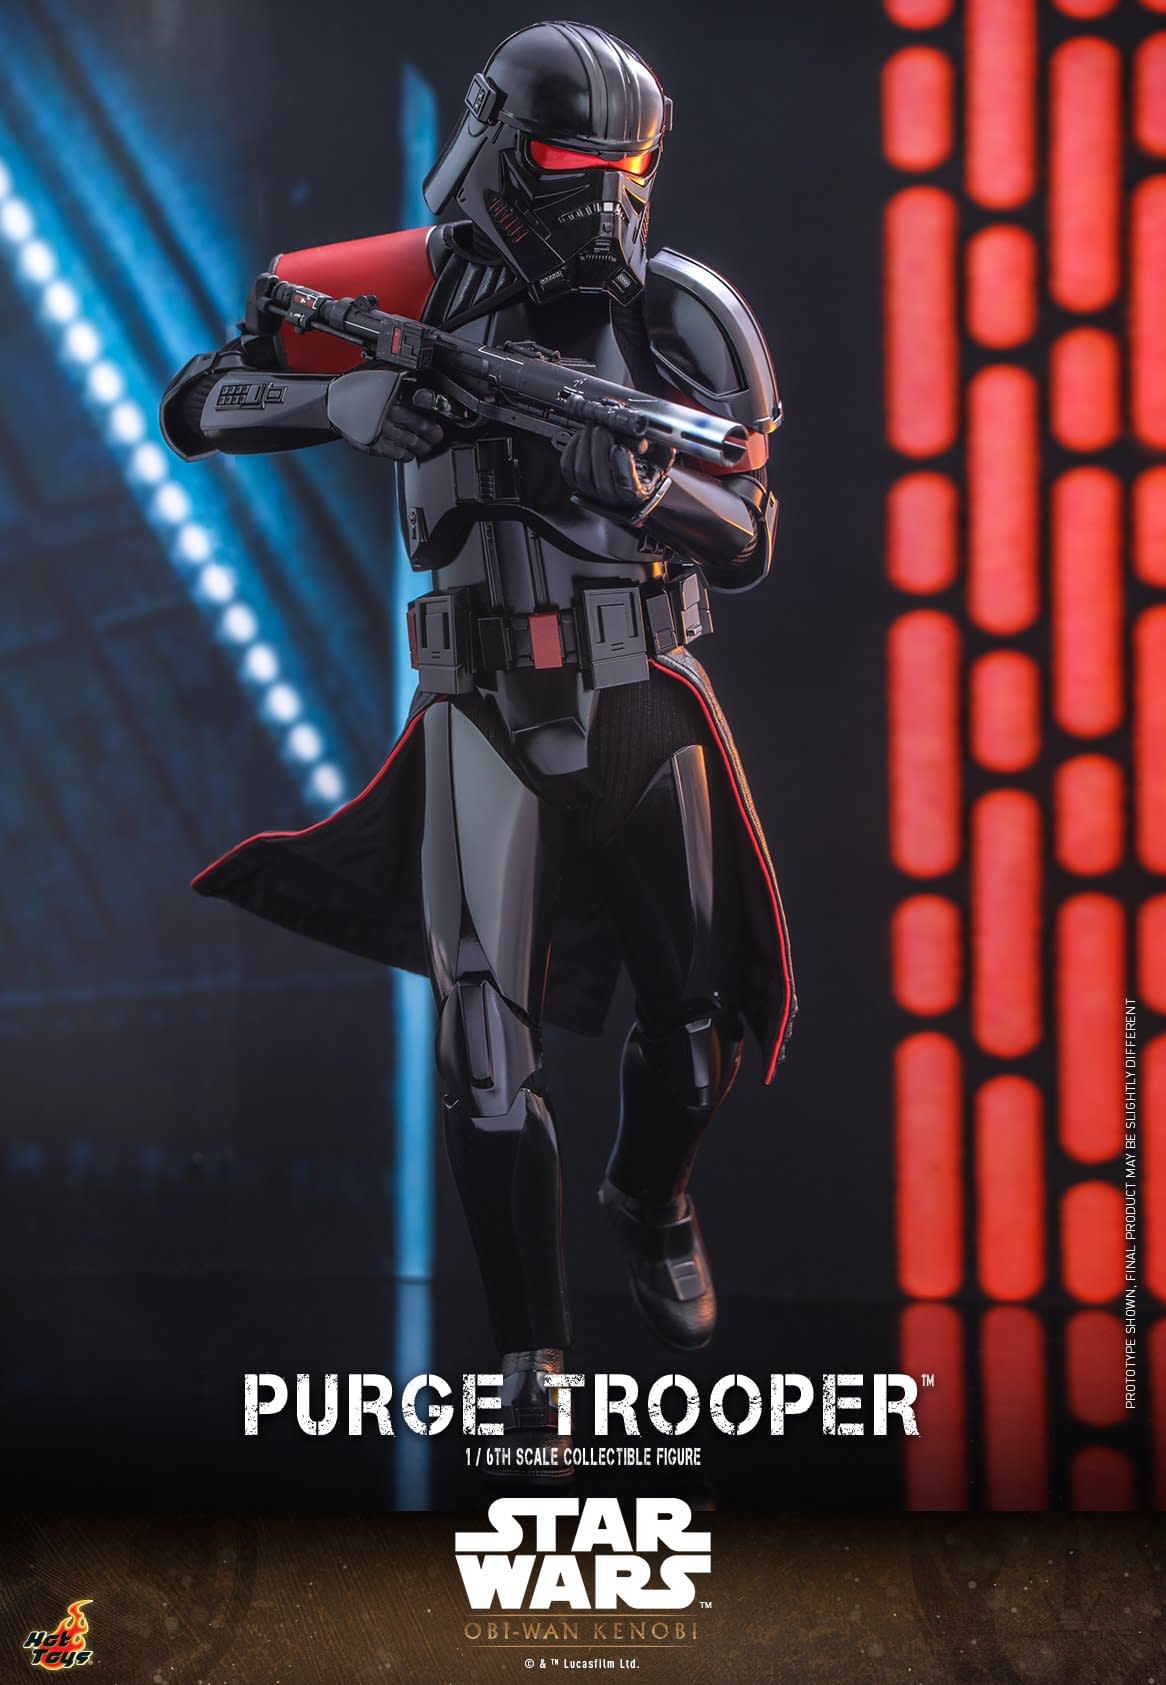 Star Wars Purge Trooper Comes to Life with New Hot Toys 1/6 Figure